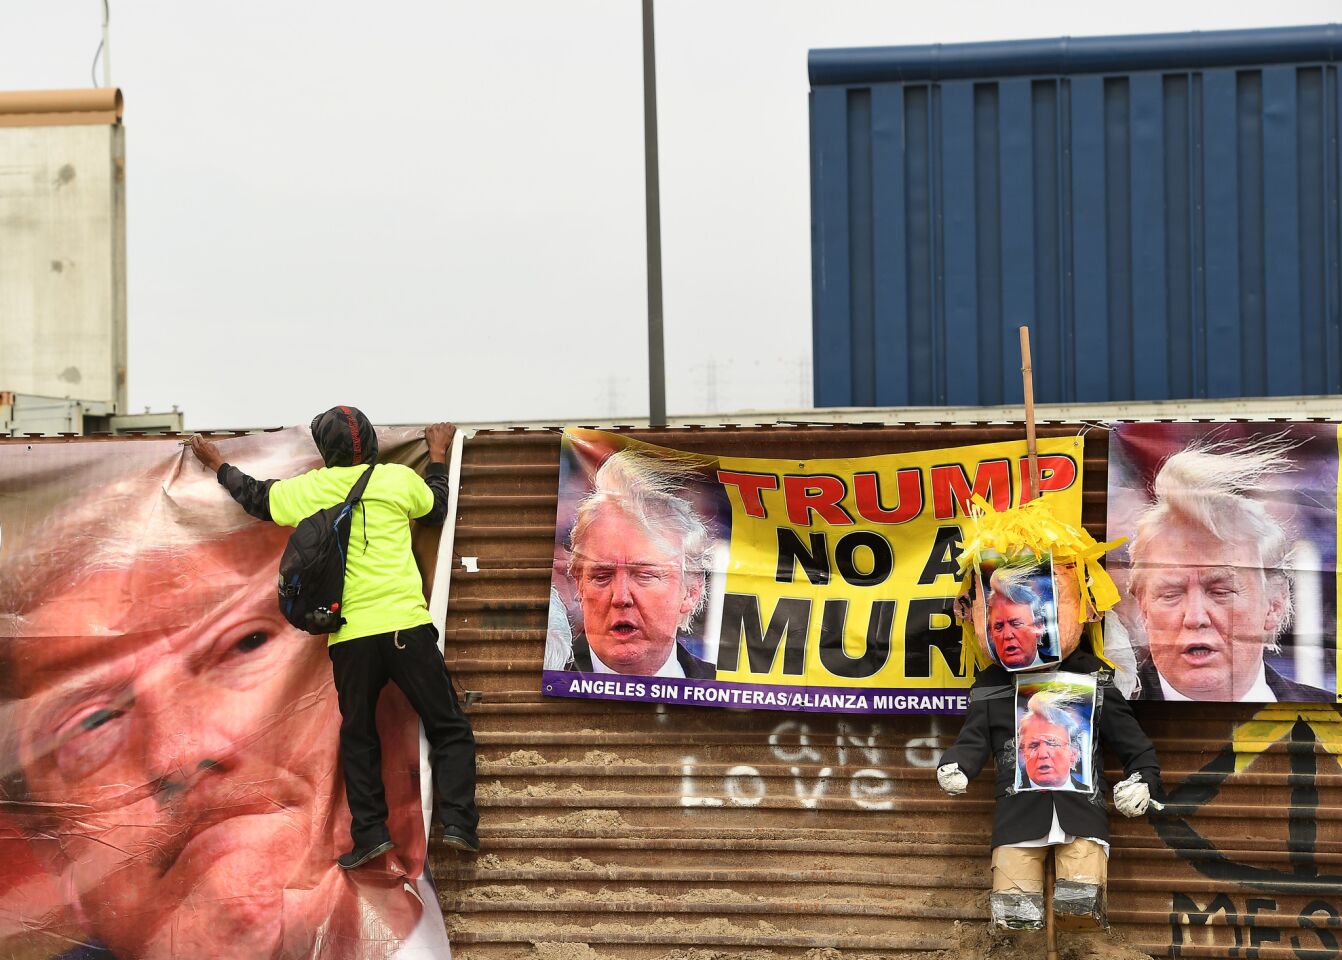 A Trump protestor hangs a banner on the Mexico side of the border.